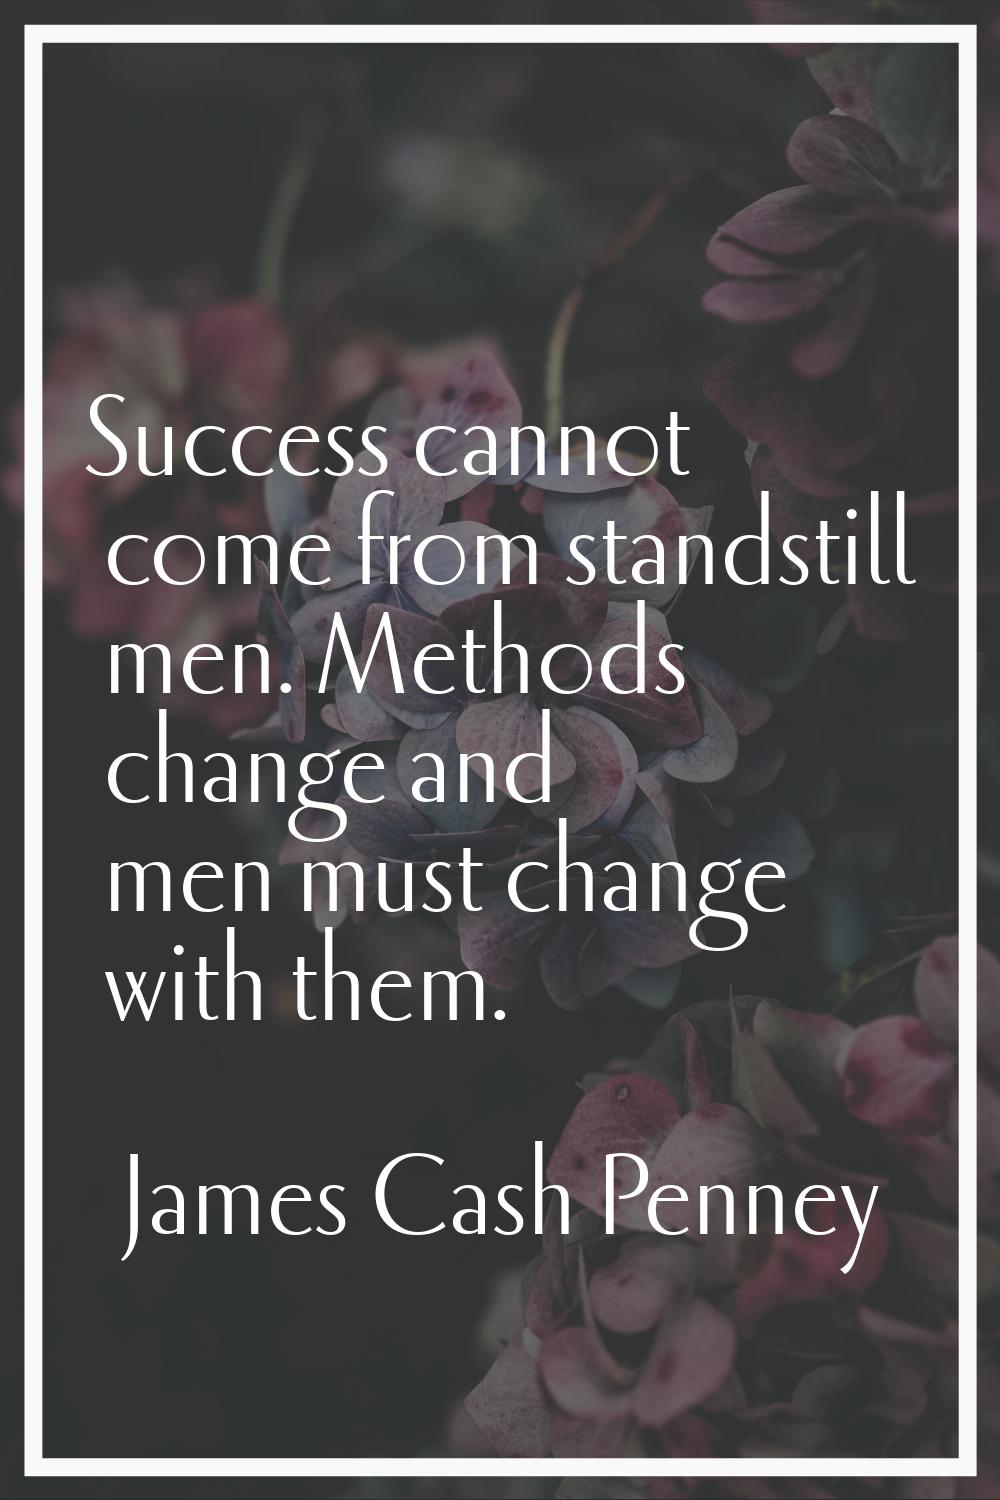 Success cannot come from standstill men. Methods change and men must change with them.